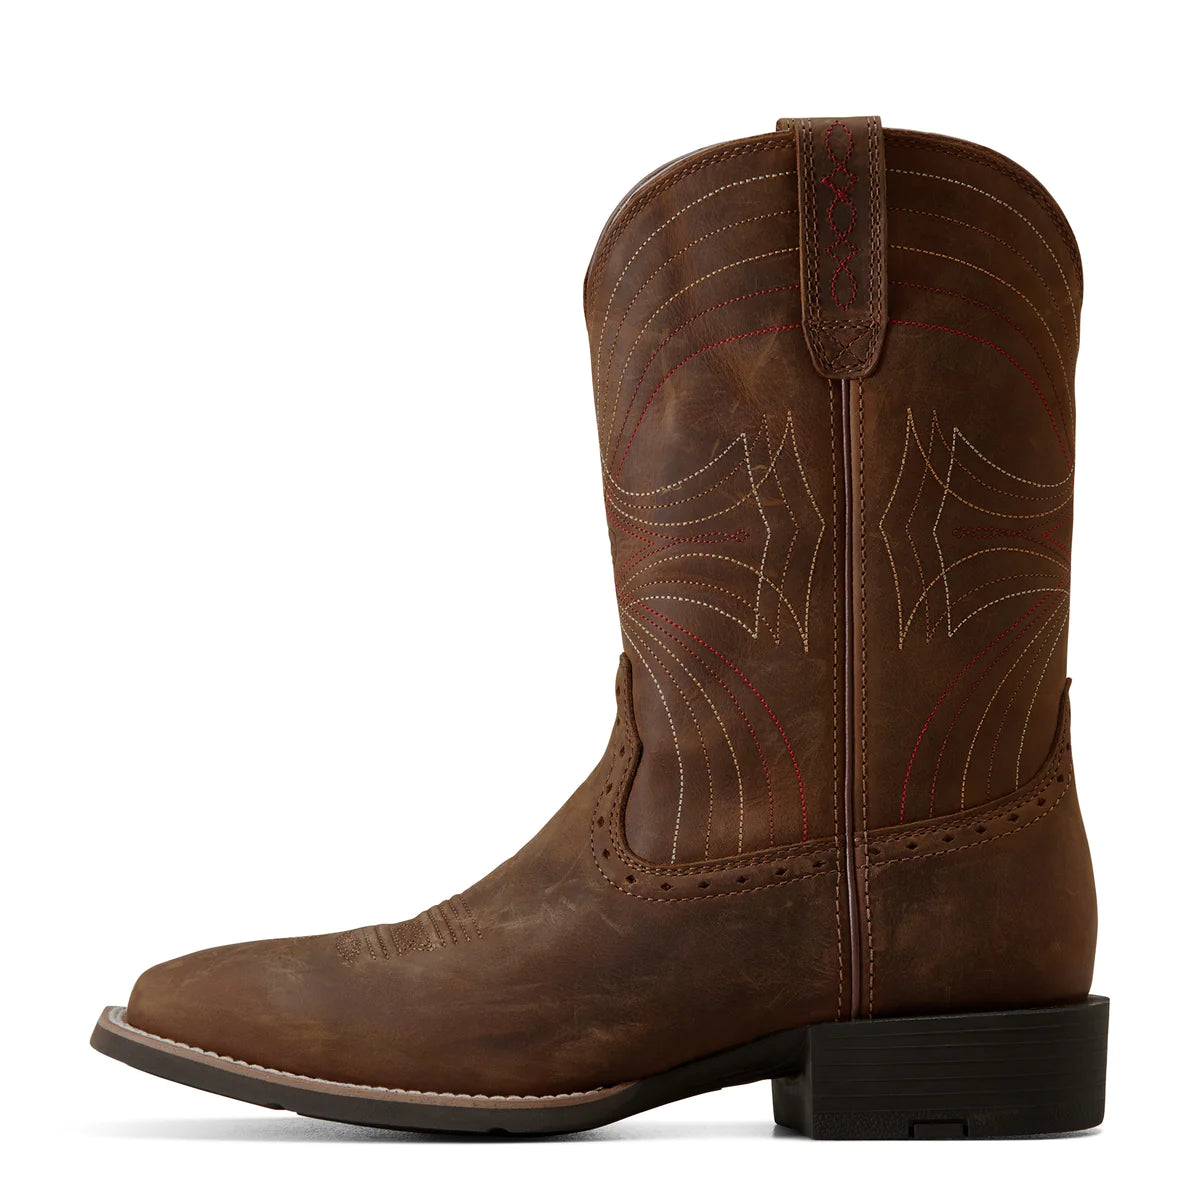 Ariat Mns Sport Wide Sq Toe Distressed Brown - CLEARANCE